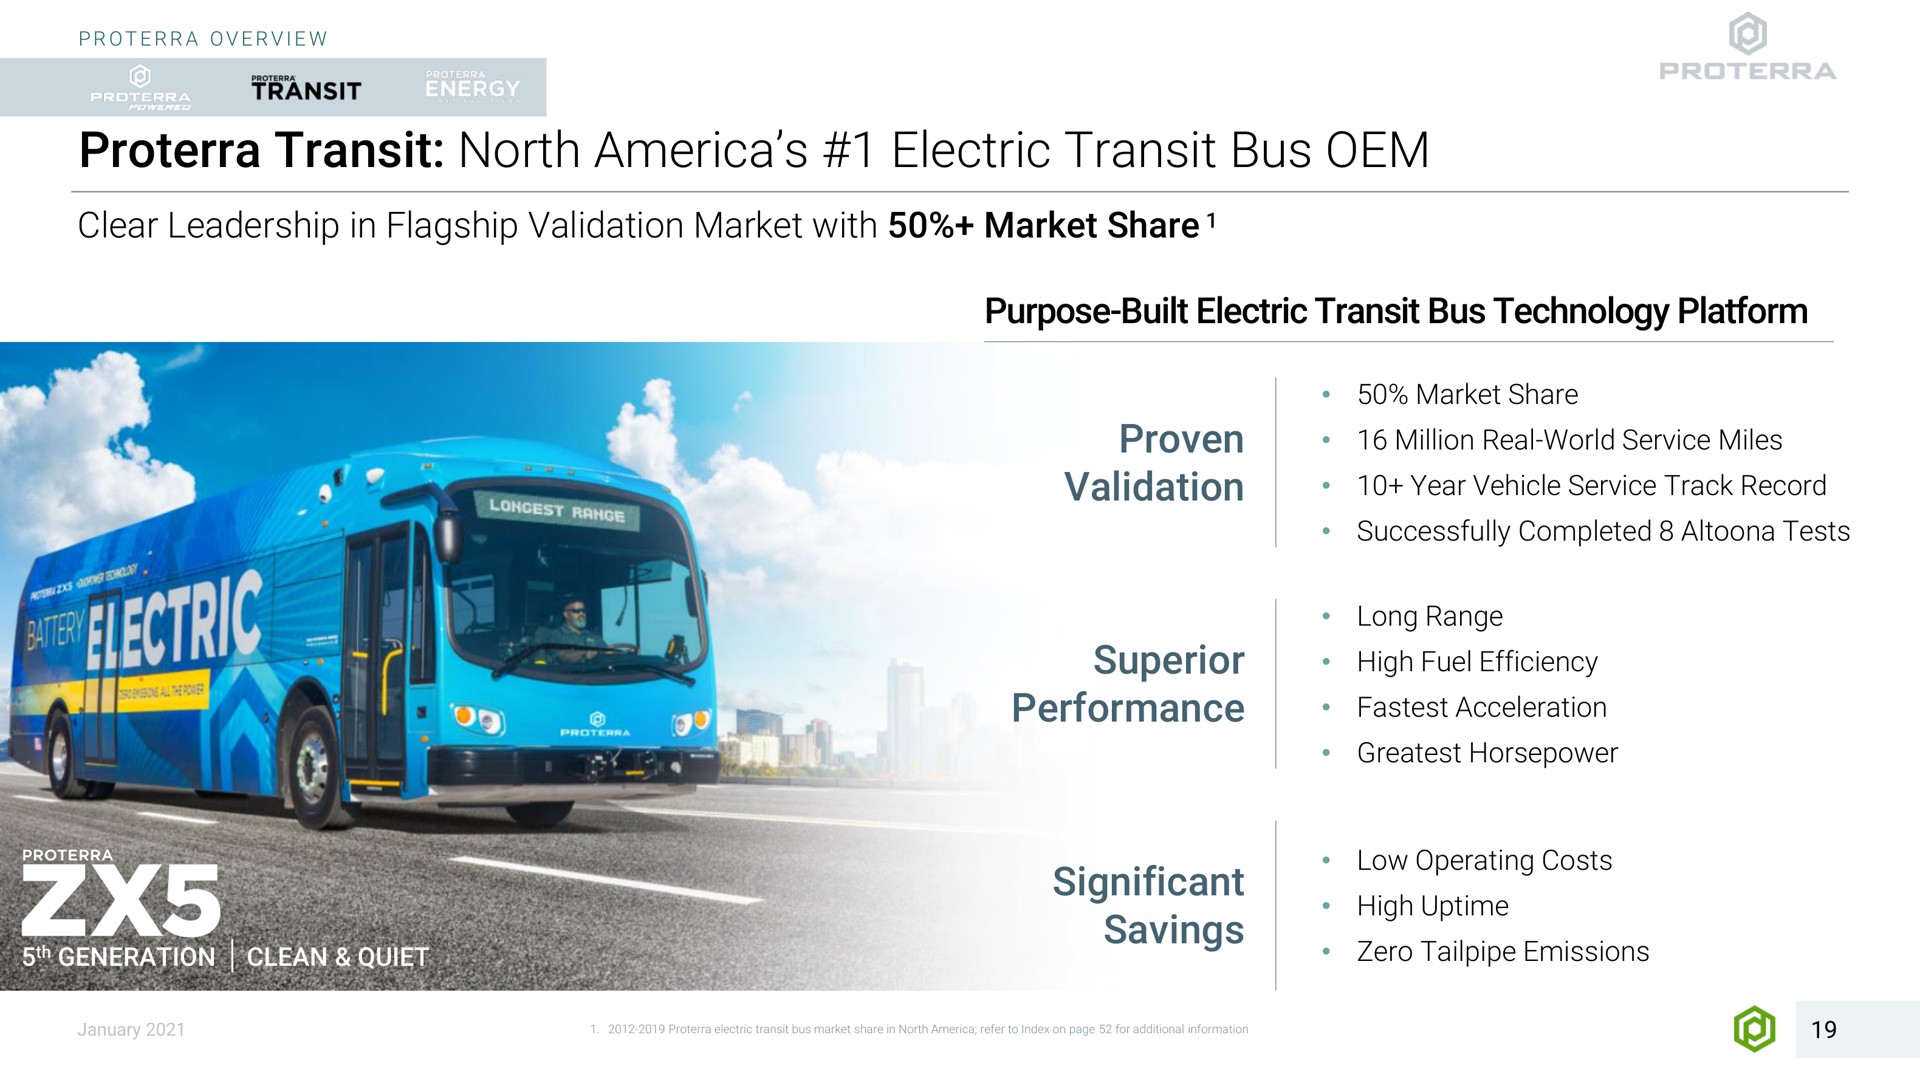 transit north electric transit bus proven validation superior performance significant savings clear leadership in flagship market with market share purpose built technology platform market share million real world service miles year vehicle service track record successfully completed tests quiet generation clean long range high fuel efficiency acceleration horsepower low operating costs high zero tailpipe emissions | Proterra